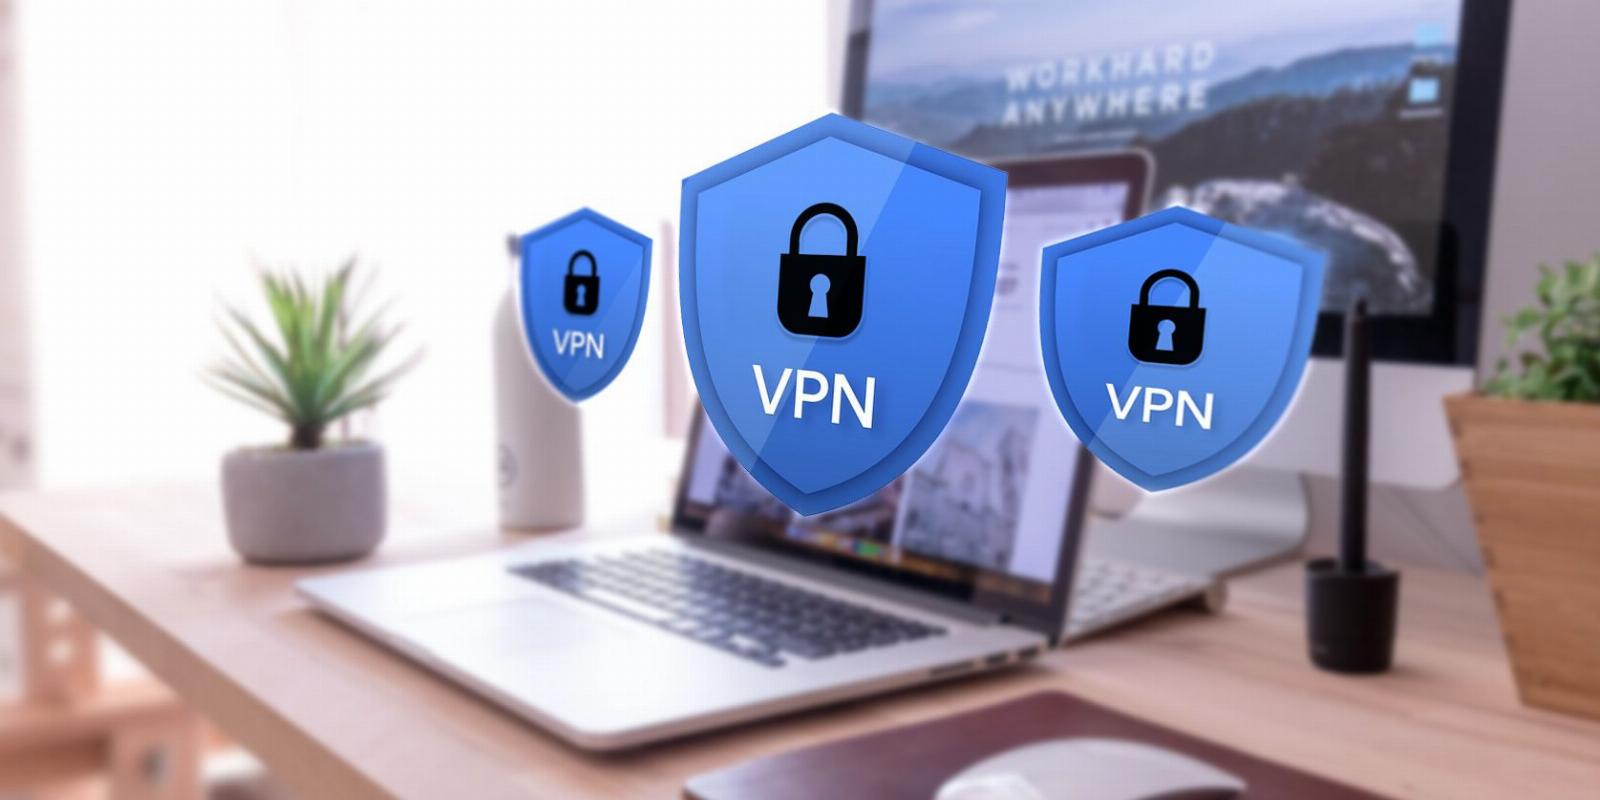 VPNBook Is Free, But Is It the Right VPN For You?